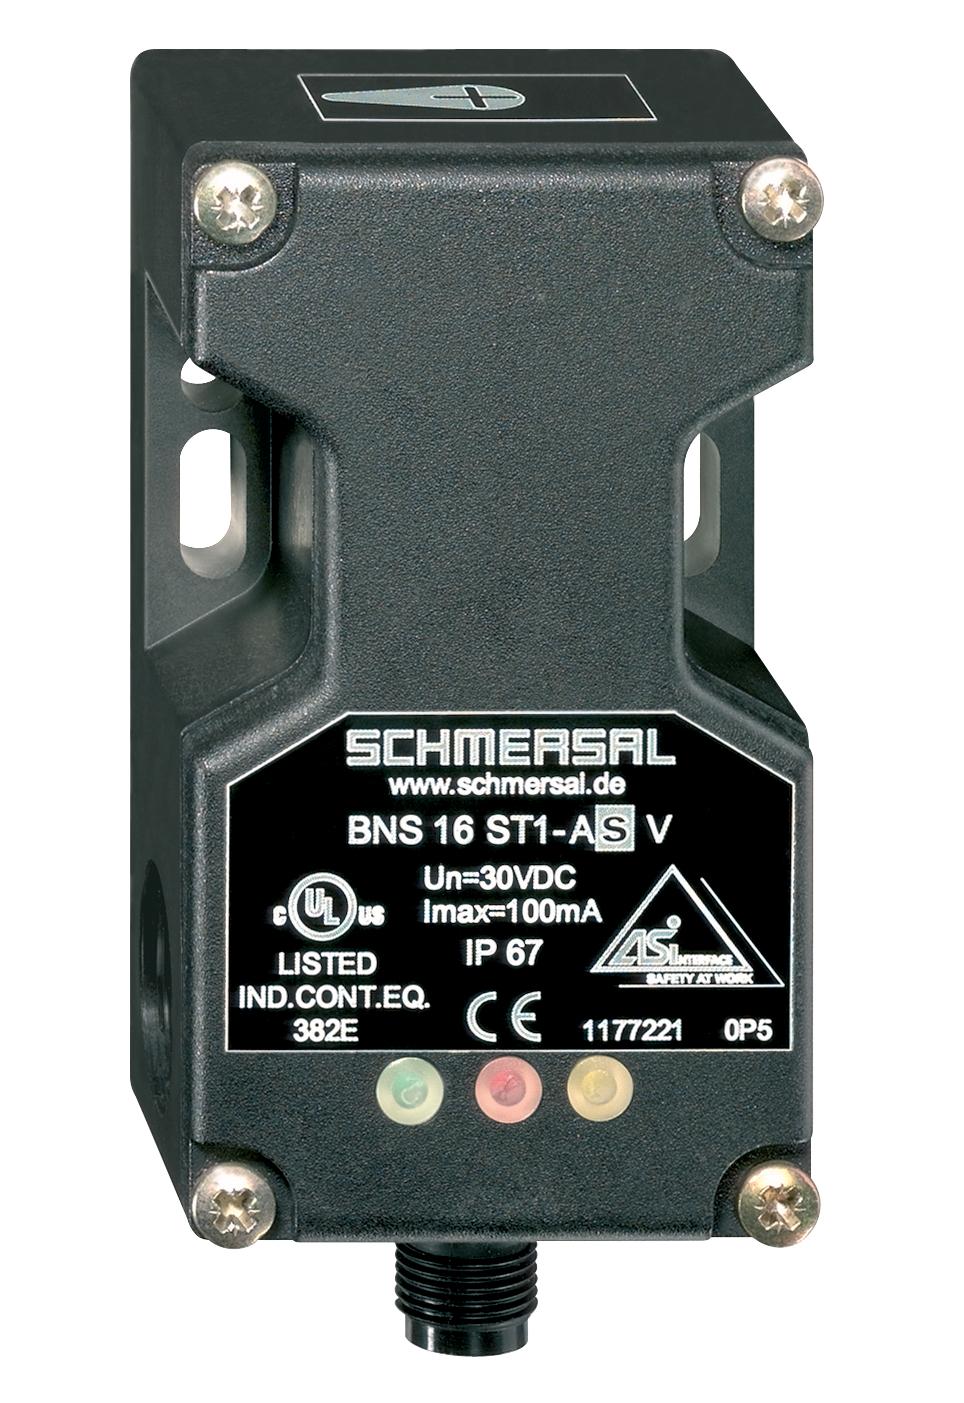 Schmersal BNS 16 ST1-AS V AS interface safety at work; Safety switchgear; connector plug M12, bottom, 4-pole; Safety sensor; Thermoplastic enclosure; no mechanical wear; 40 mm x 90 mm x 39 mm; Integrated AS-Interface; Concealed mounting possible; Long life; Insensitive to transver